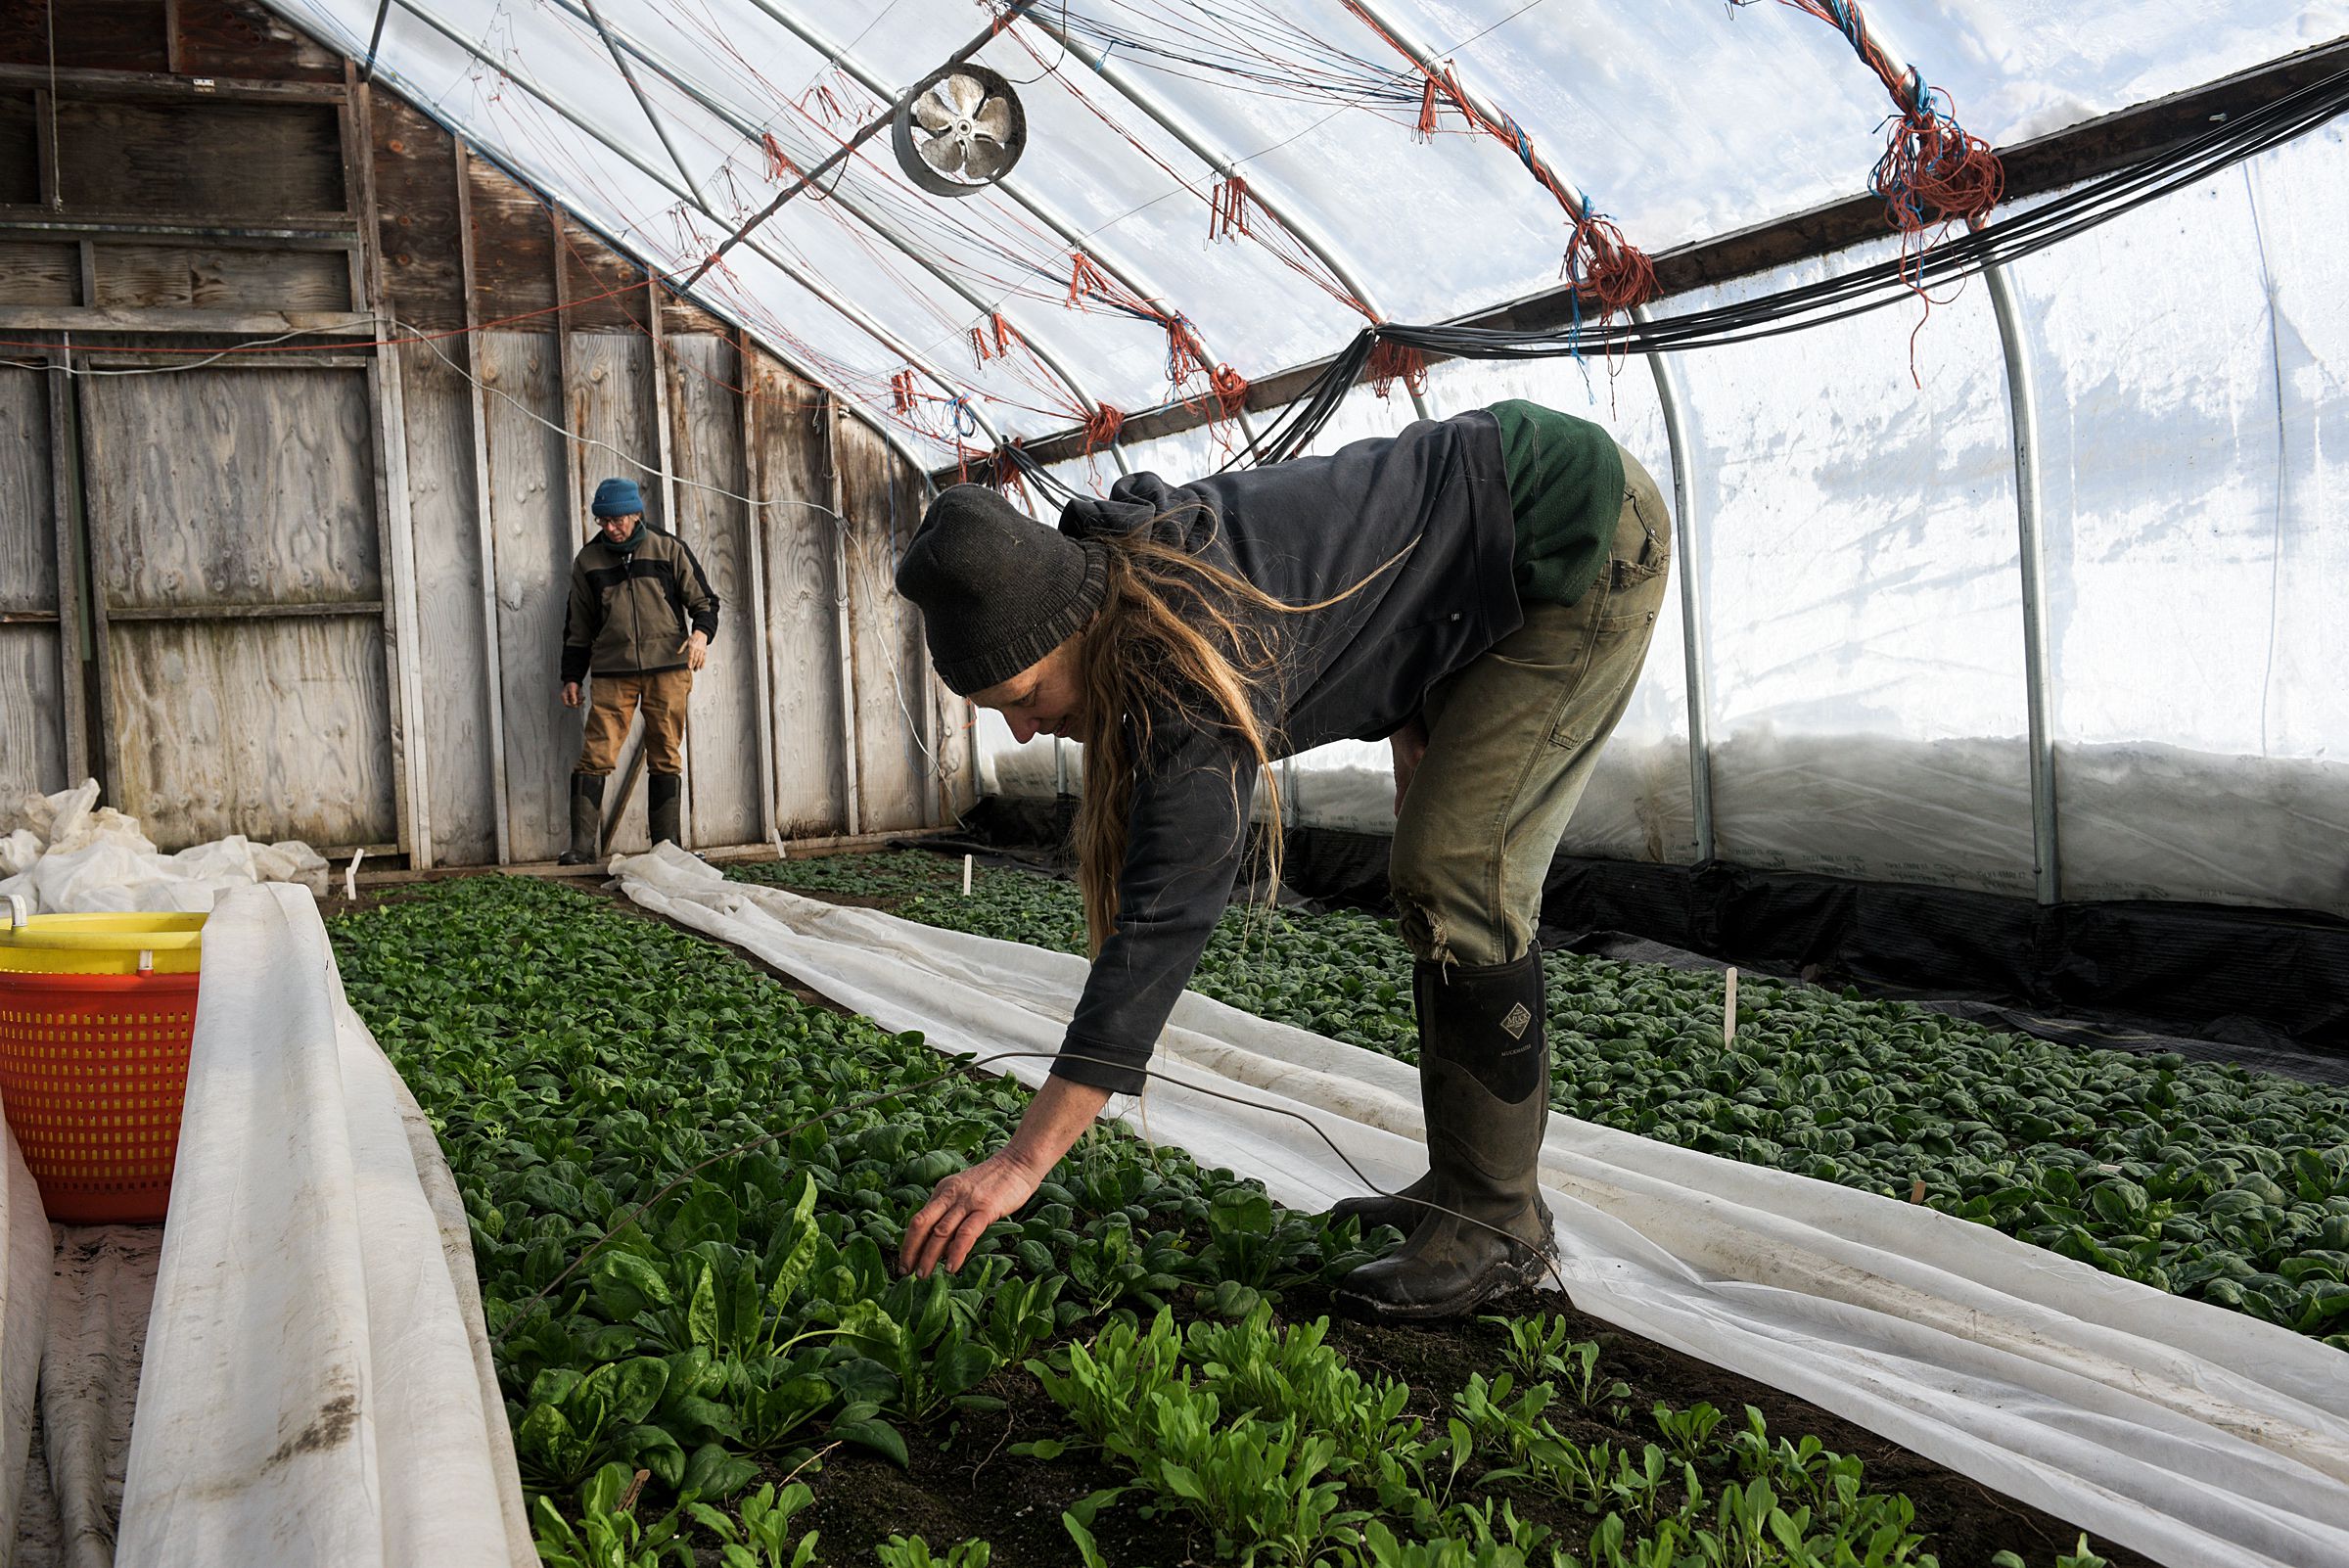 Suzanne Long and Tim Sanford of Luna Bleu Farm in Royalton, Vt., check on a bed of spinach after uncovering it to soak up the short hours of daylight Thursday, Dec. 20, 2019. The greens remain covered for much of the day to retain heat and moisture. (Valley News - James M. Patterson) Copyright Valley News. May not be reprinted or used online without permission. Send requests to permission@vnews.com.